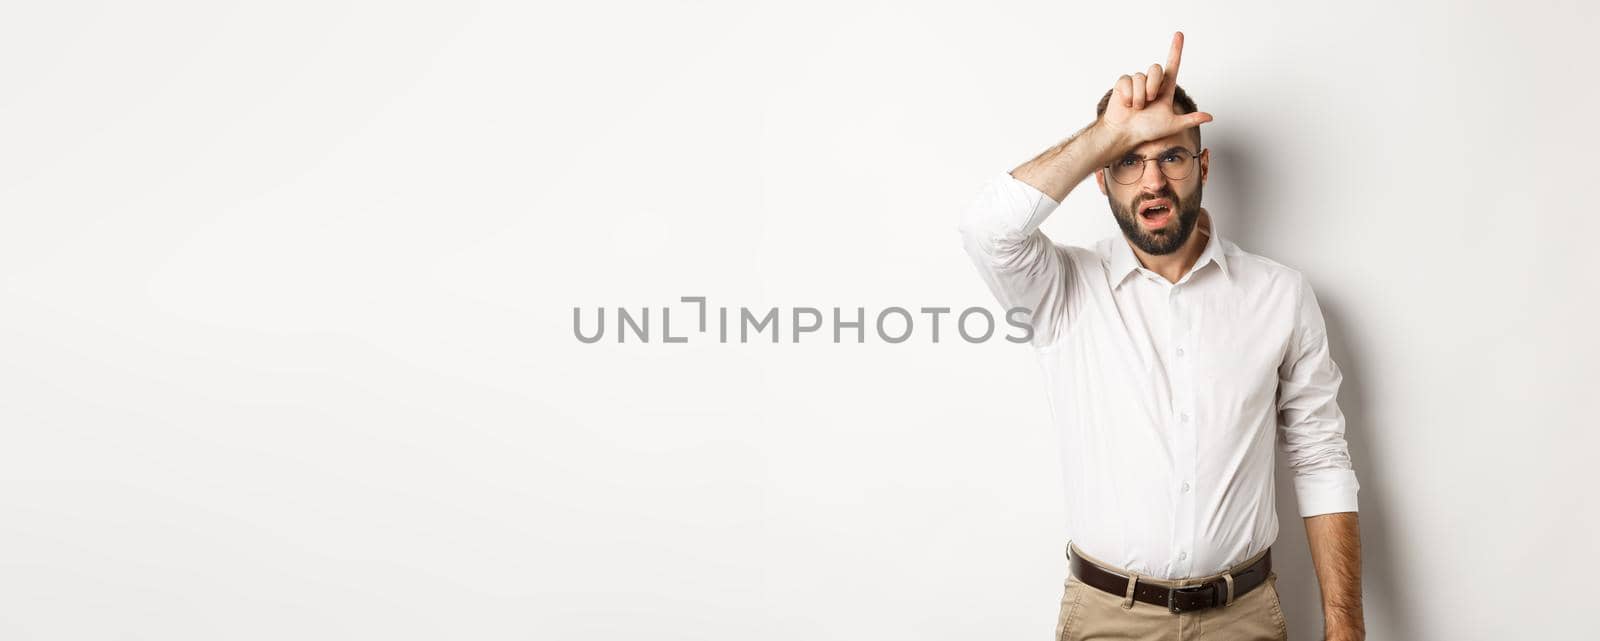 Shocked guy showing loser sign on forehead, complaining, standing over white background.